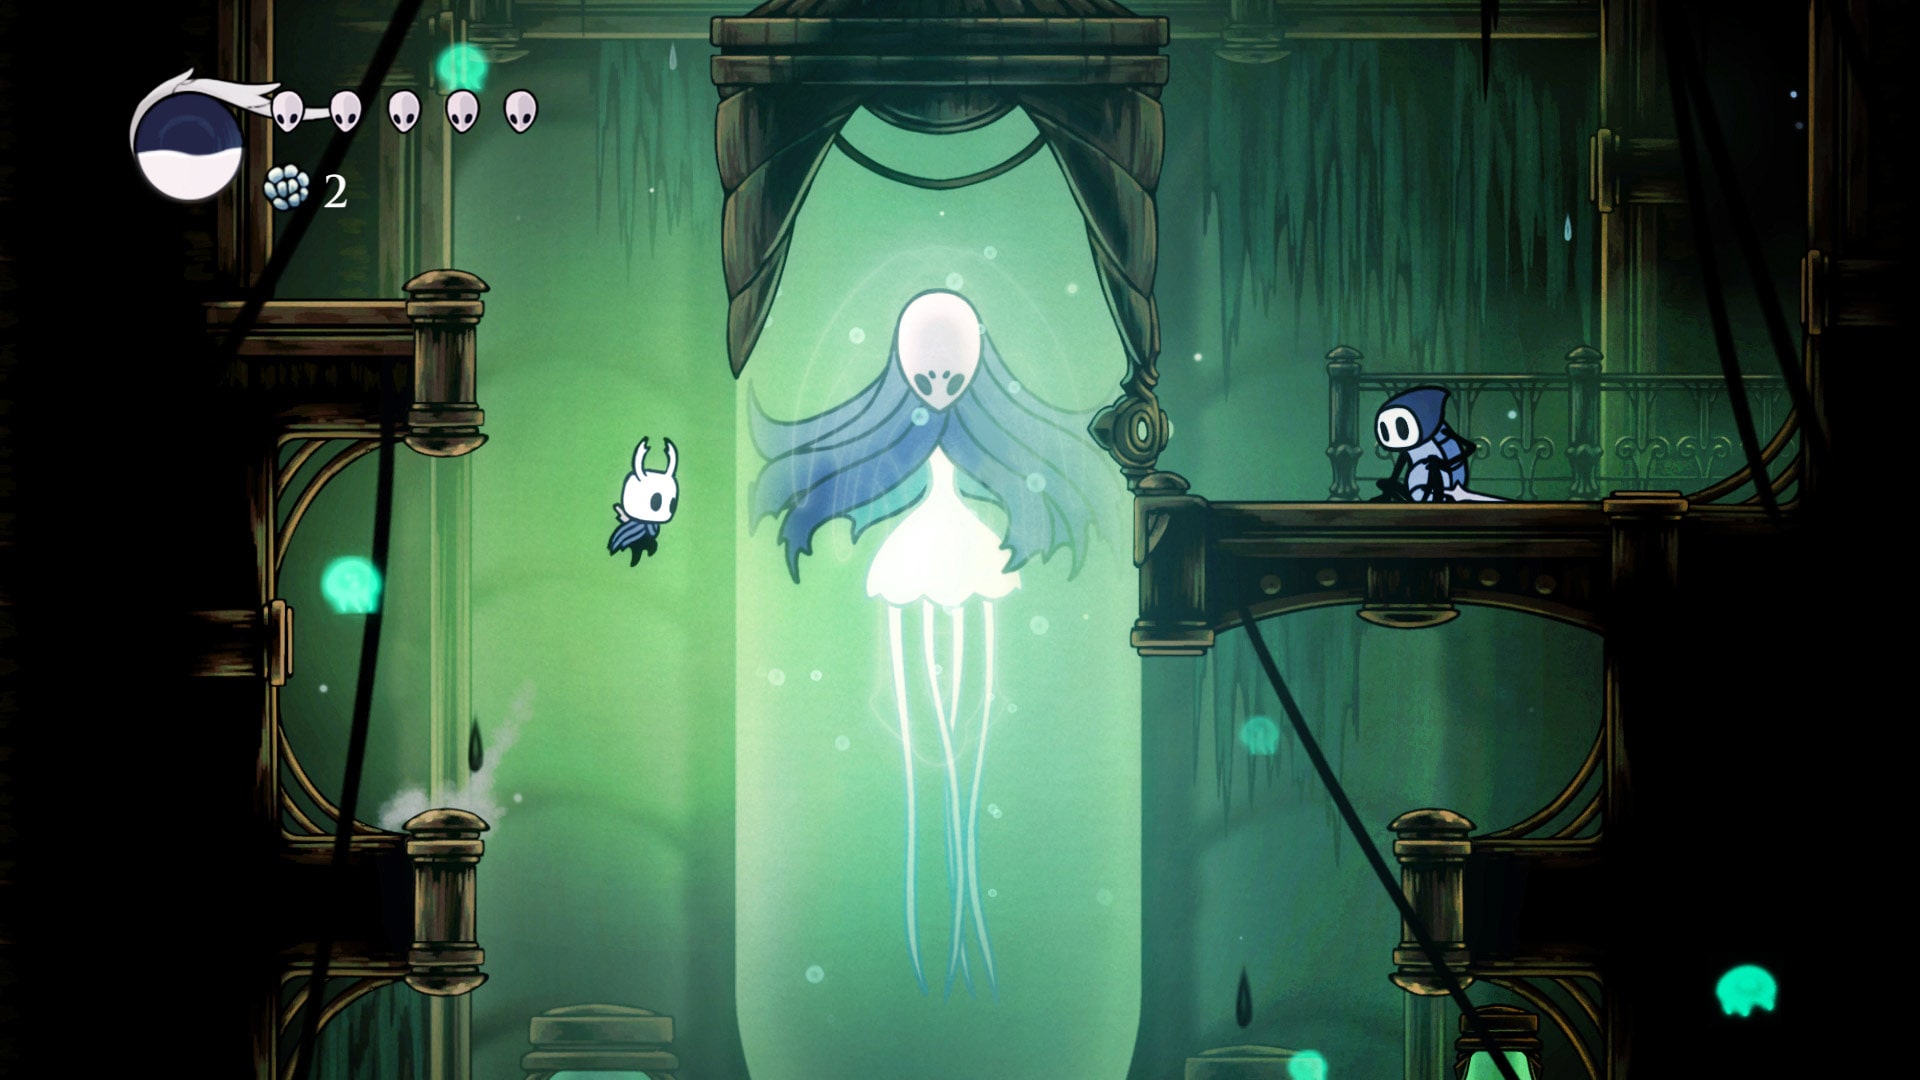 ps store hollow knight